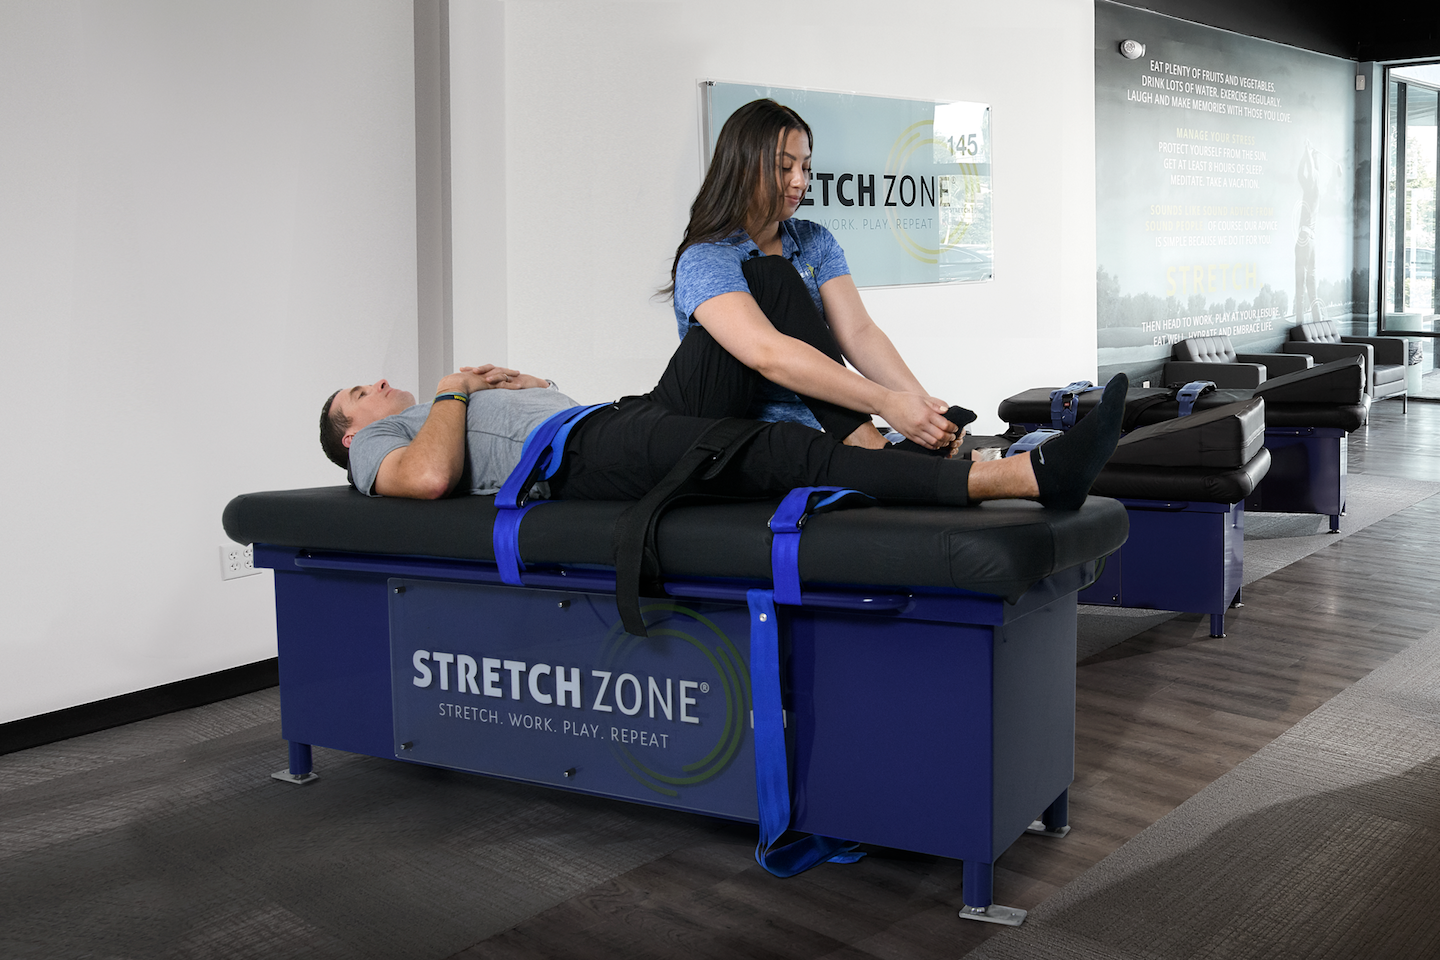 Stretch Zone Strengthens Community - Here's How